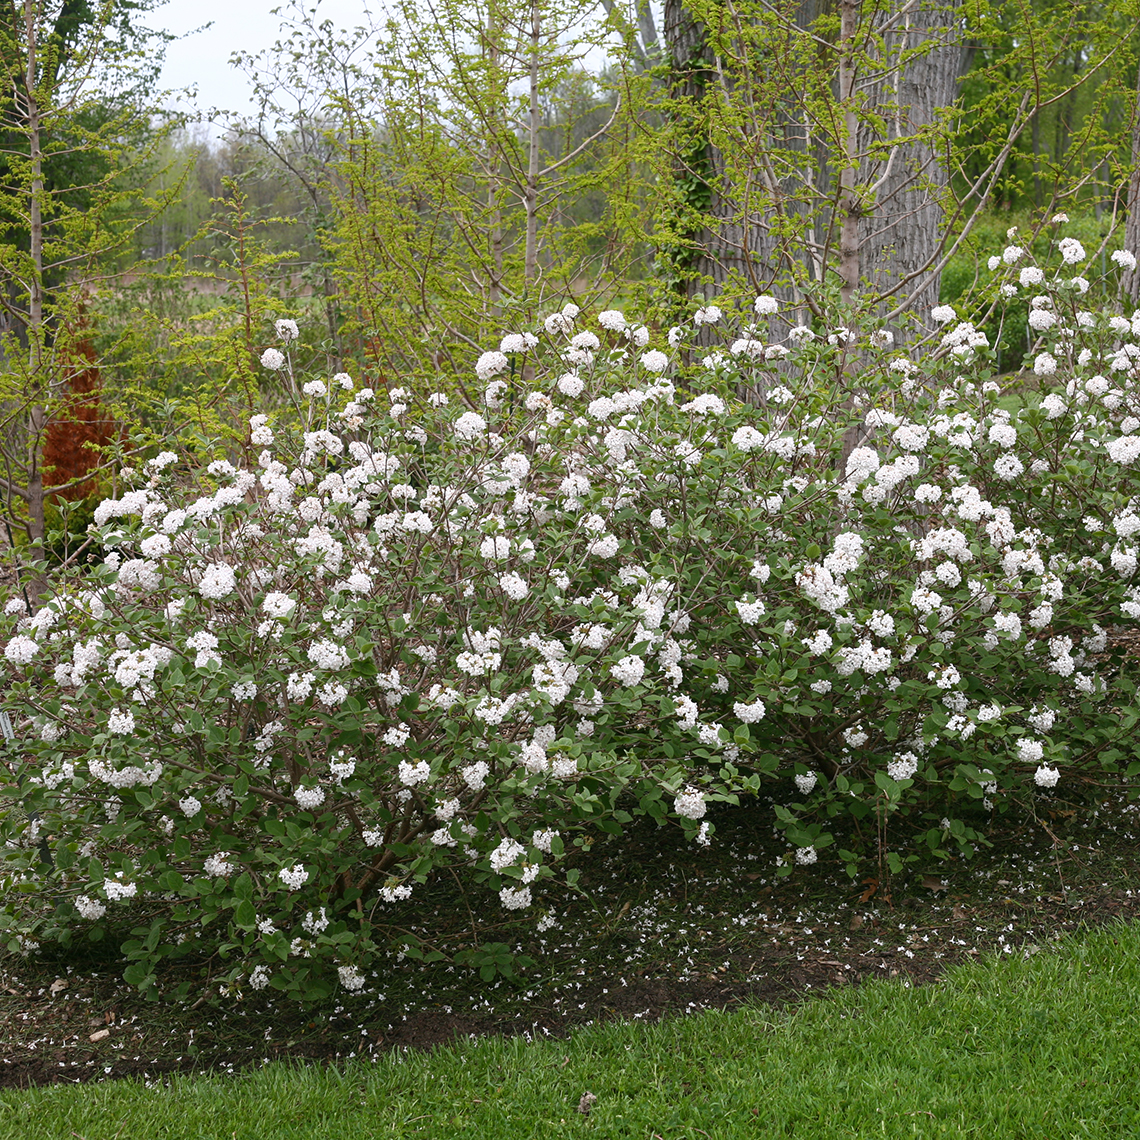 Spice Baby dwarf Koreanspice viburnum growing in a spring landscape with green grass and sprouting trees